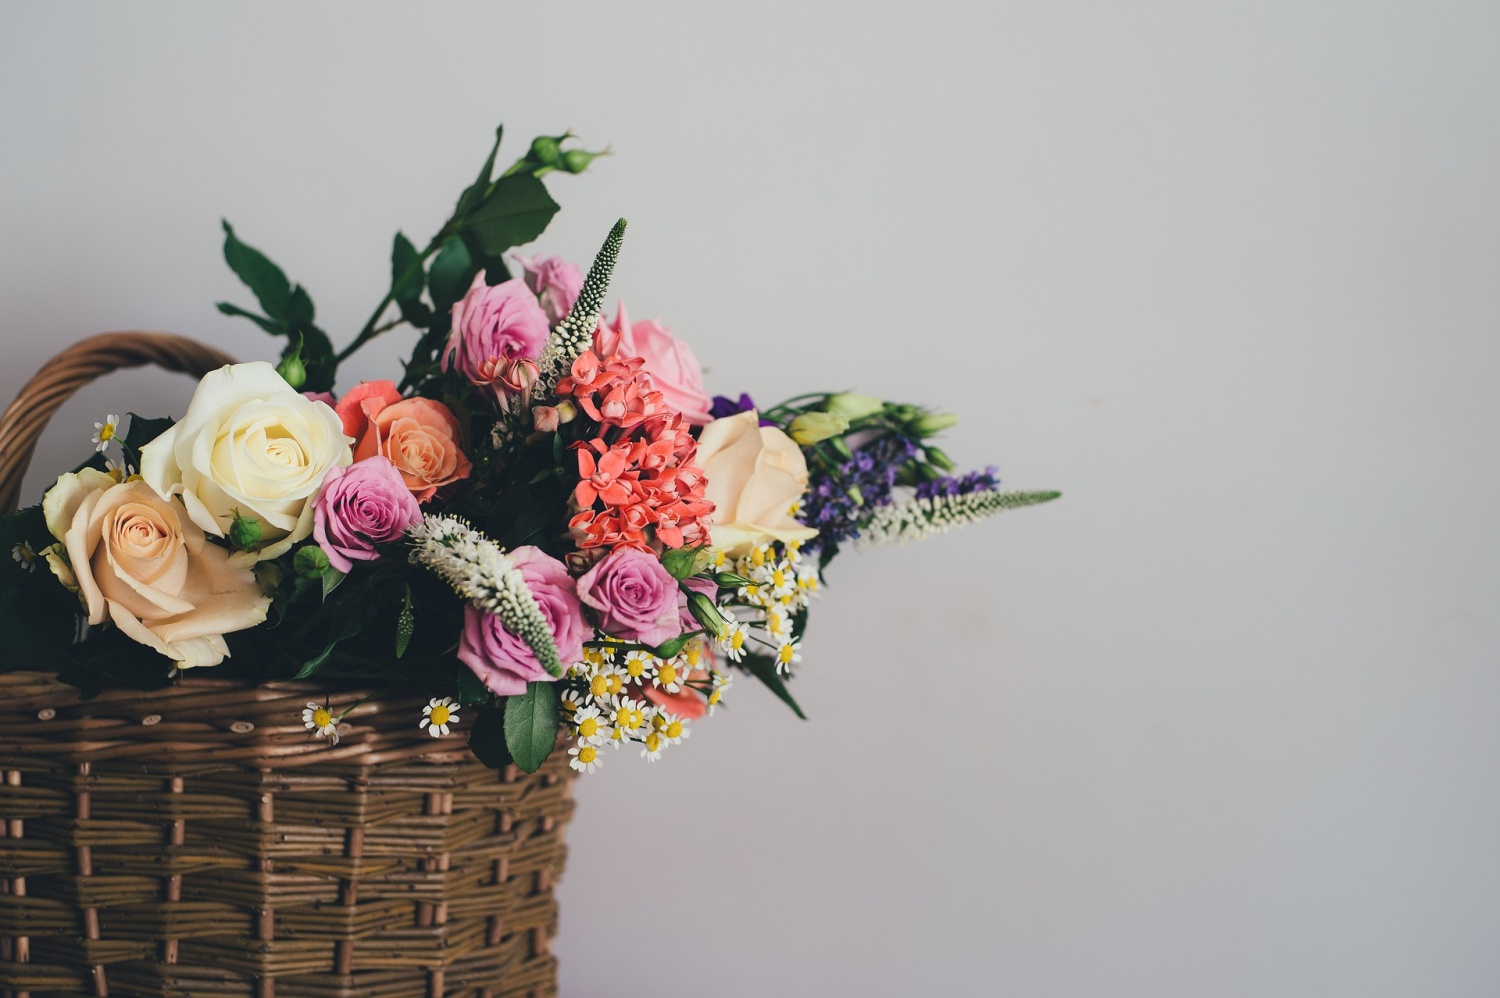 Flower Etiquette You Need to Know